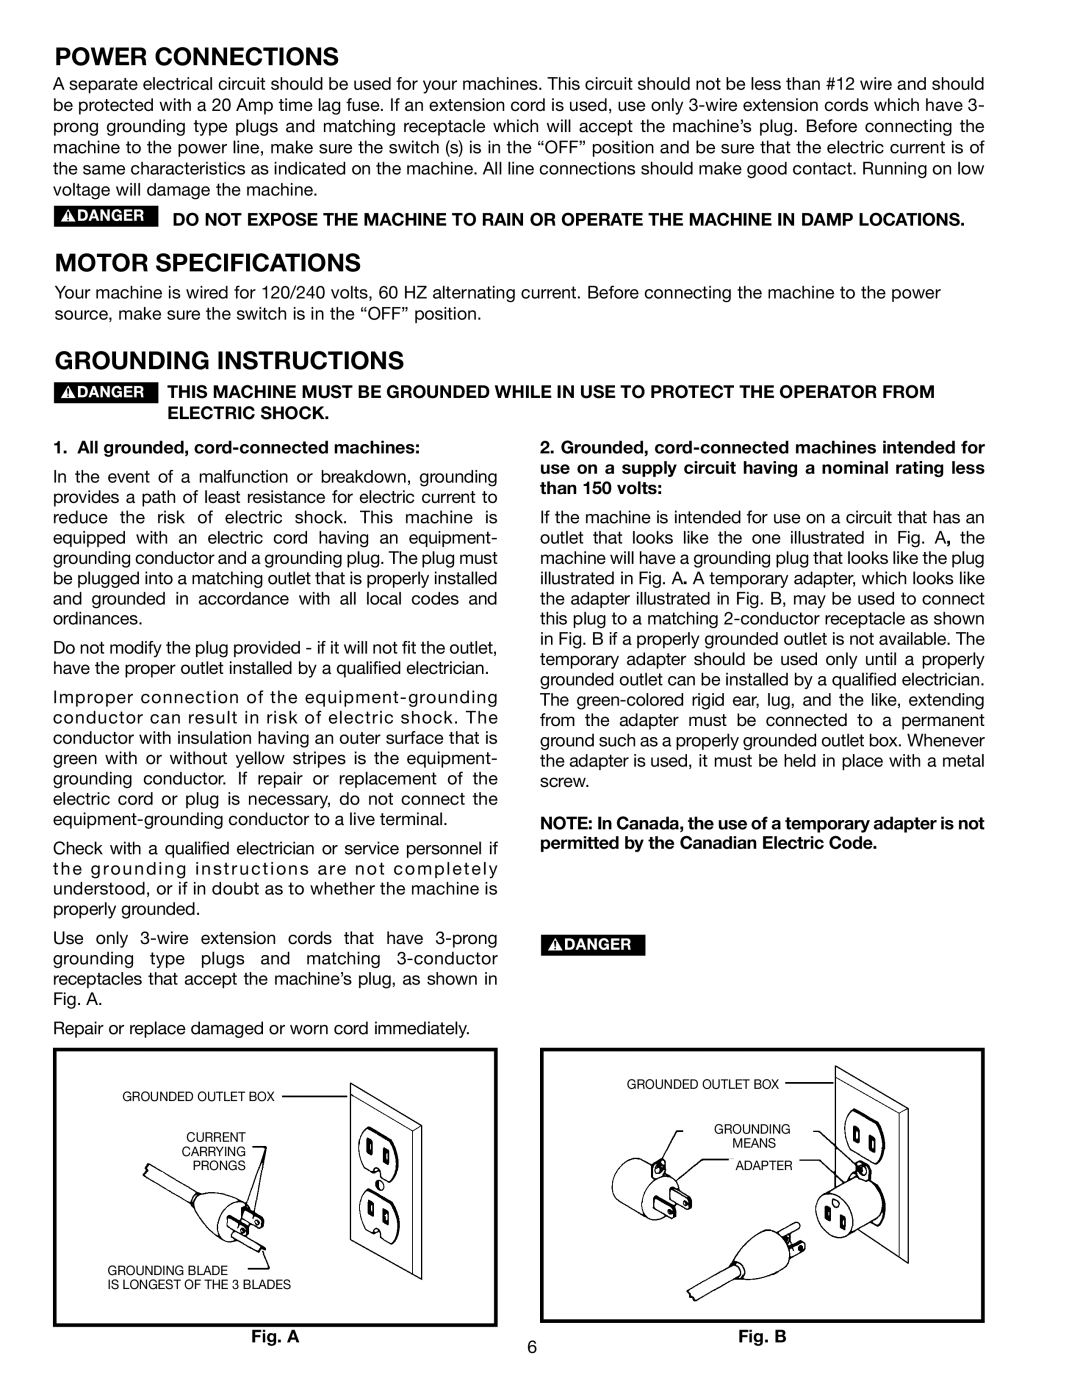 Porter-Cable 36-675 Power Connections, Motor Specifications, Grounding Instructions, All grounded, cord-connected machines 